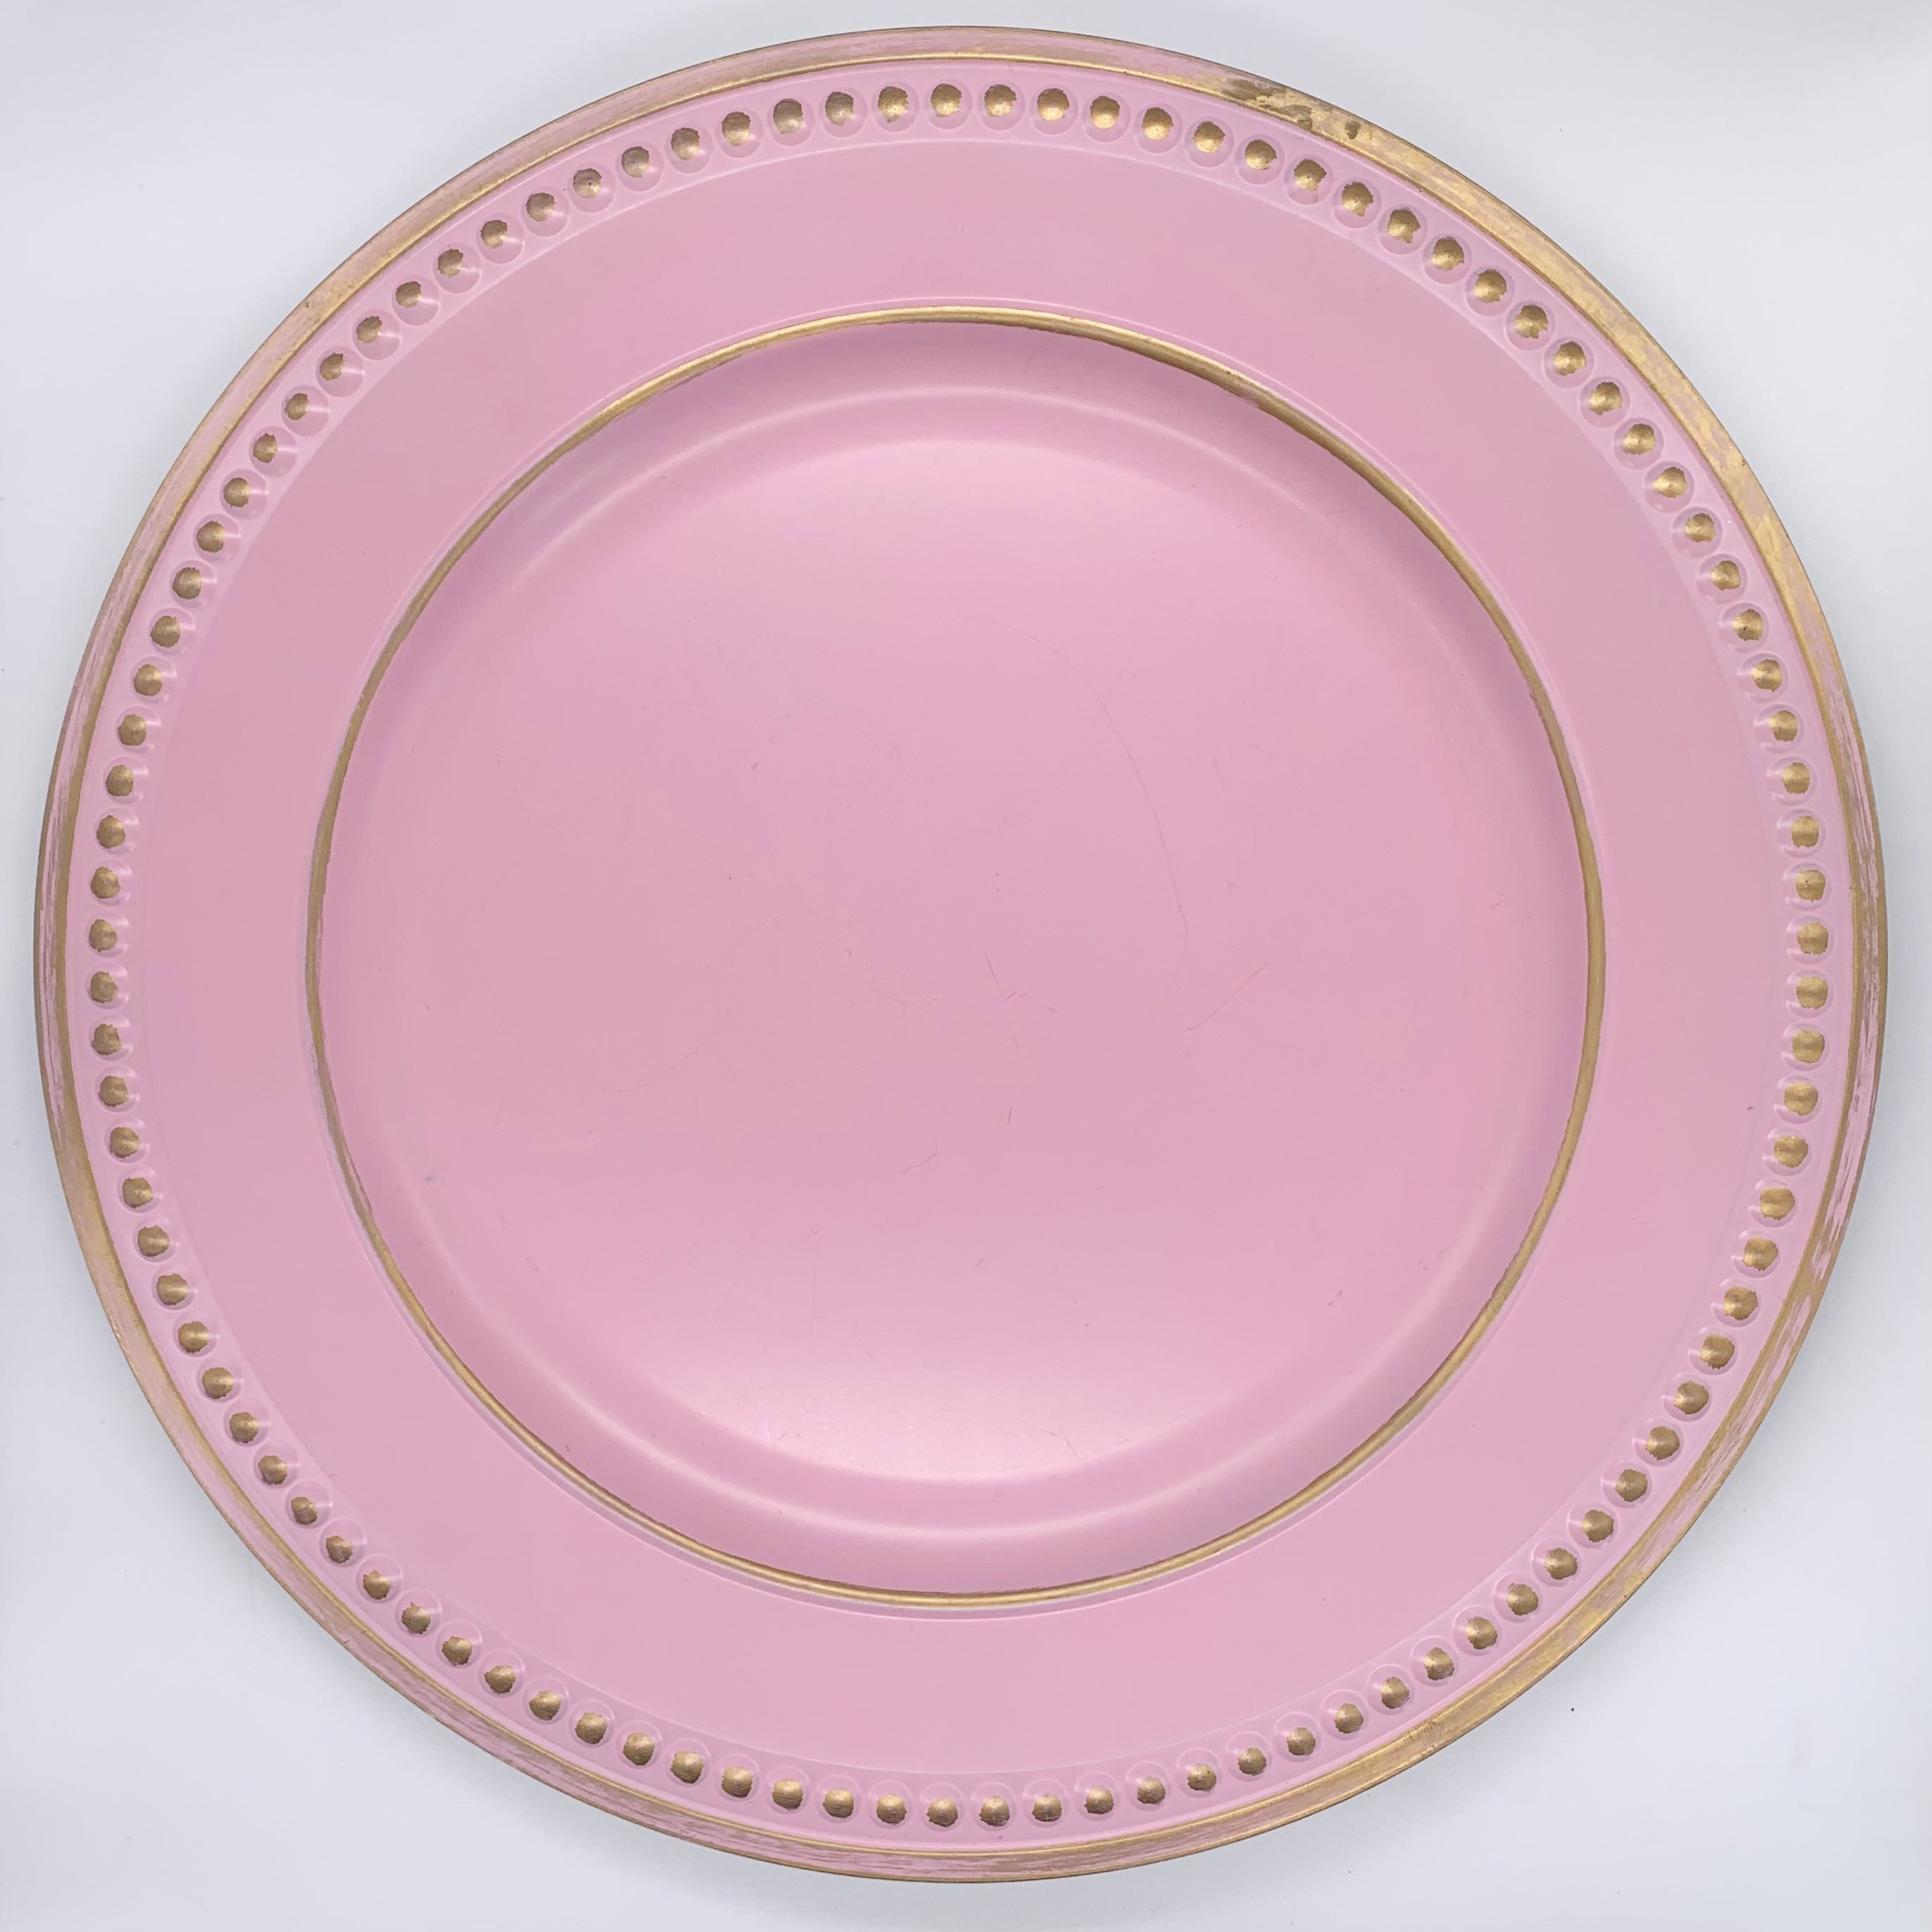 Pink Serenity Charger, set of 4